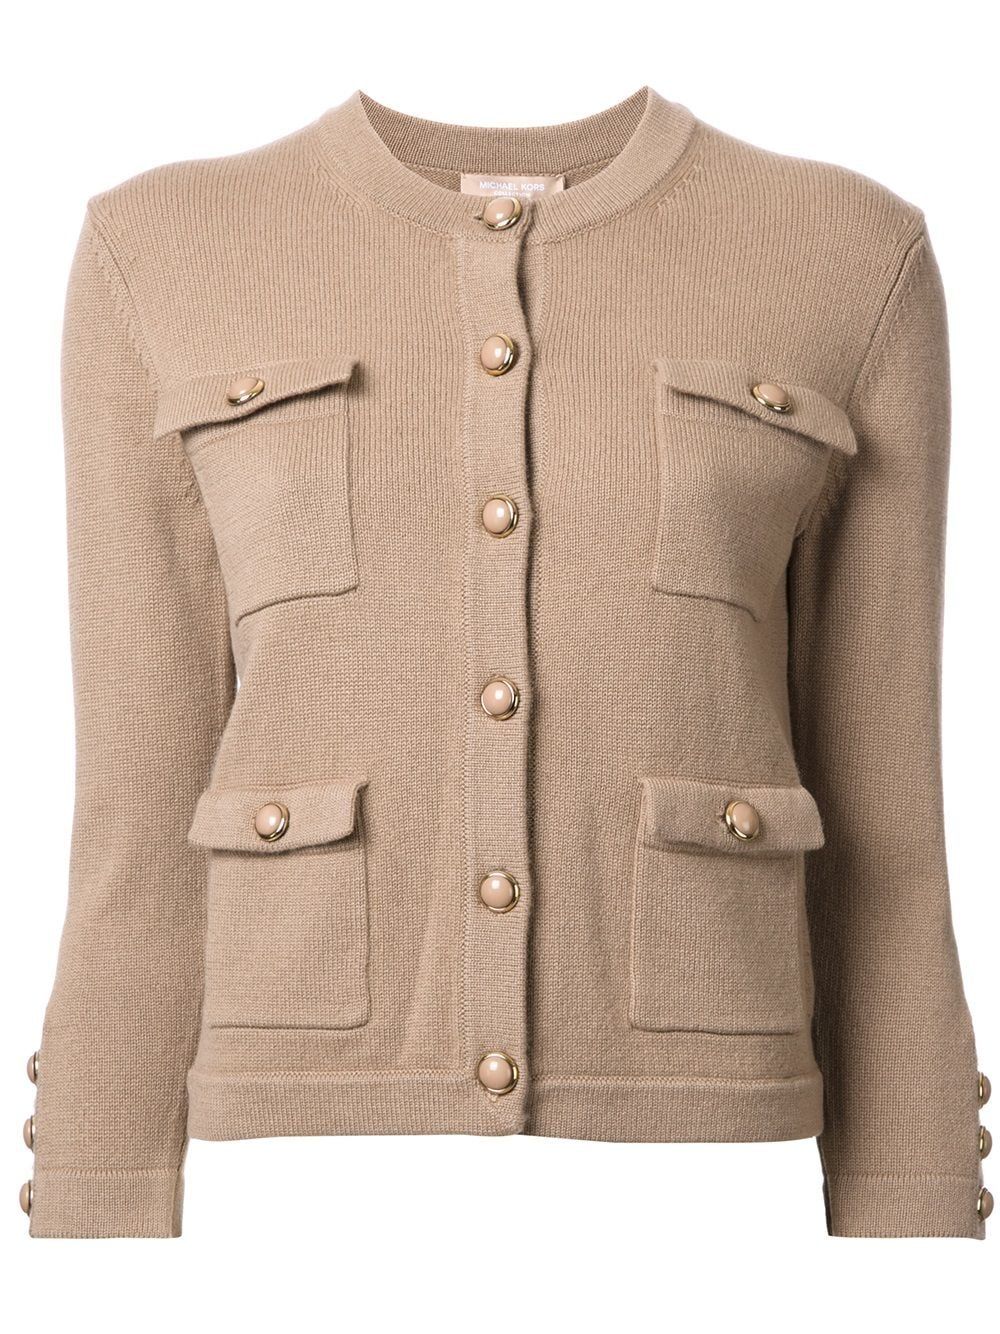 Michael Kors Collection cashmere patch pocket cardigan - Brown | FarFetch Global